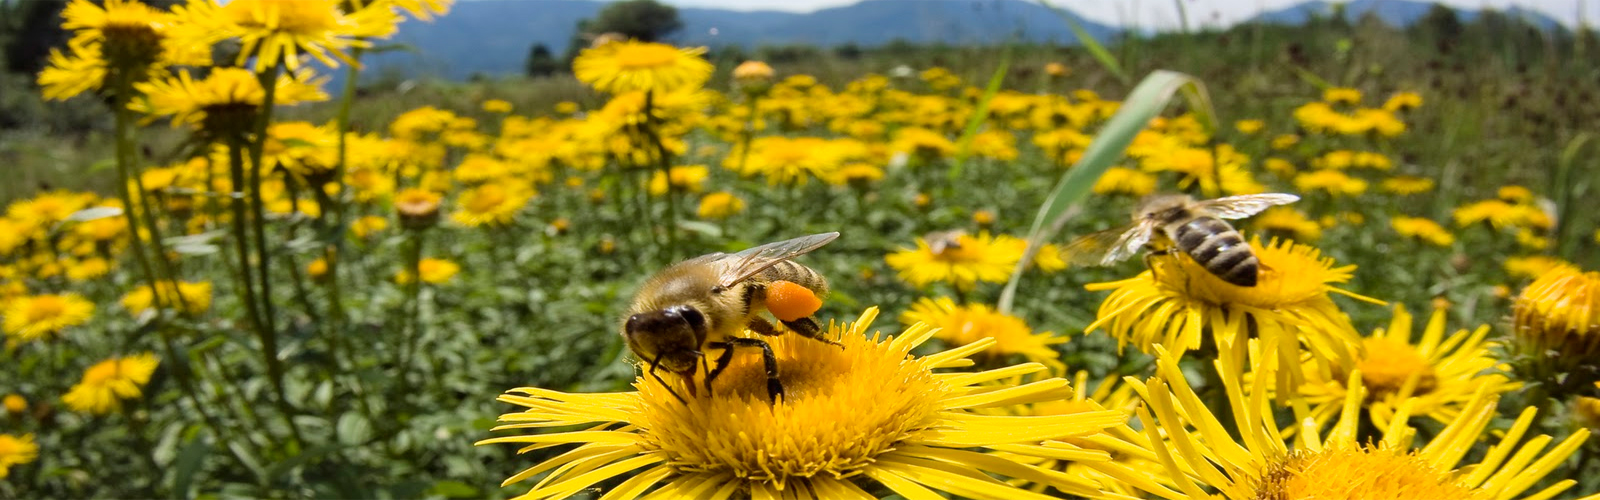 Bees can see much better than thought: scientists